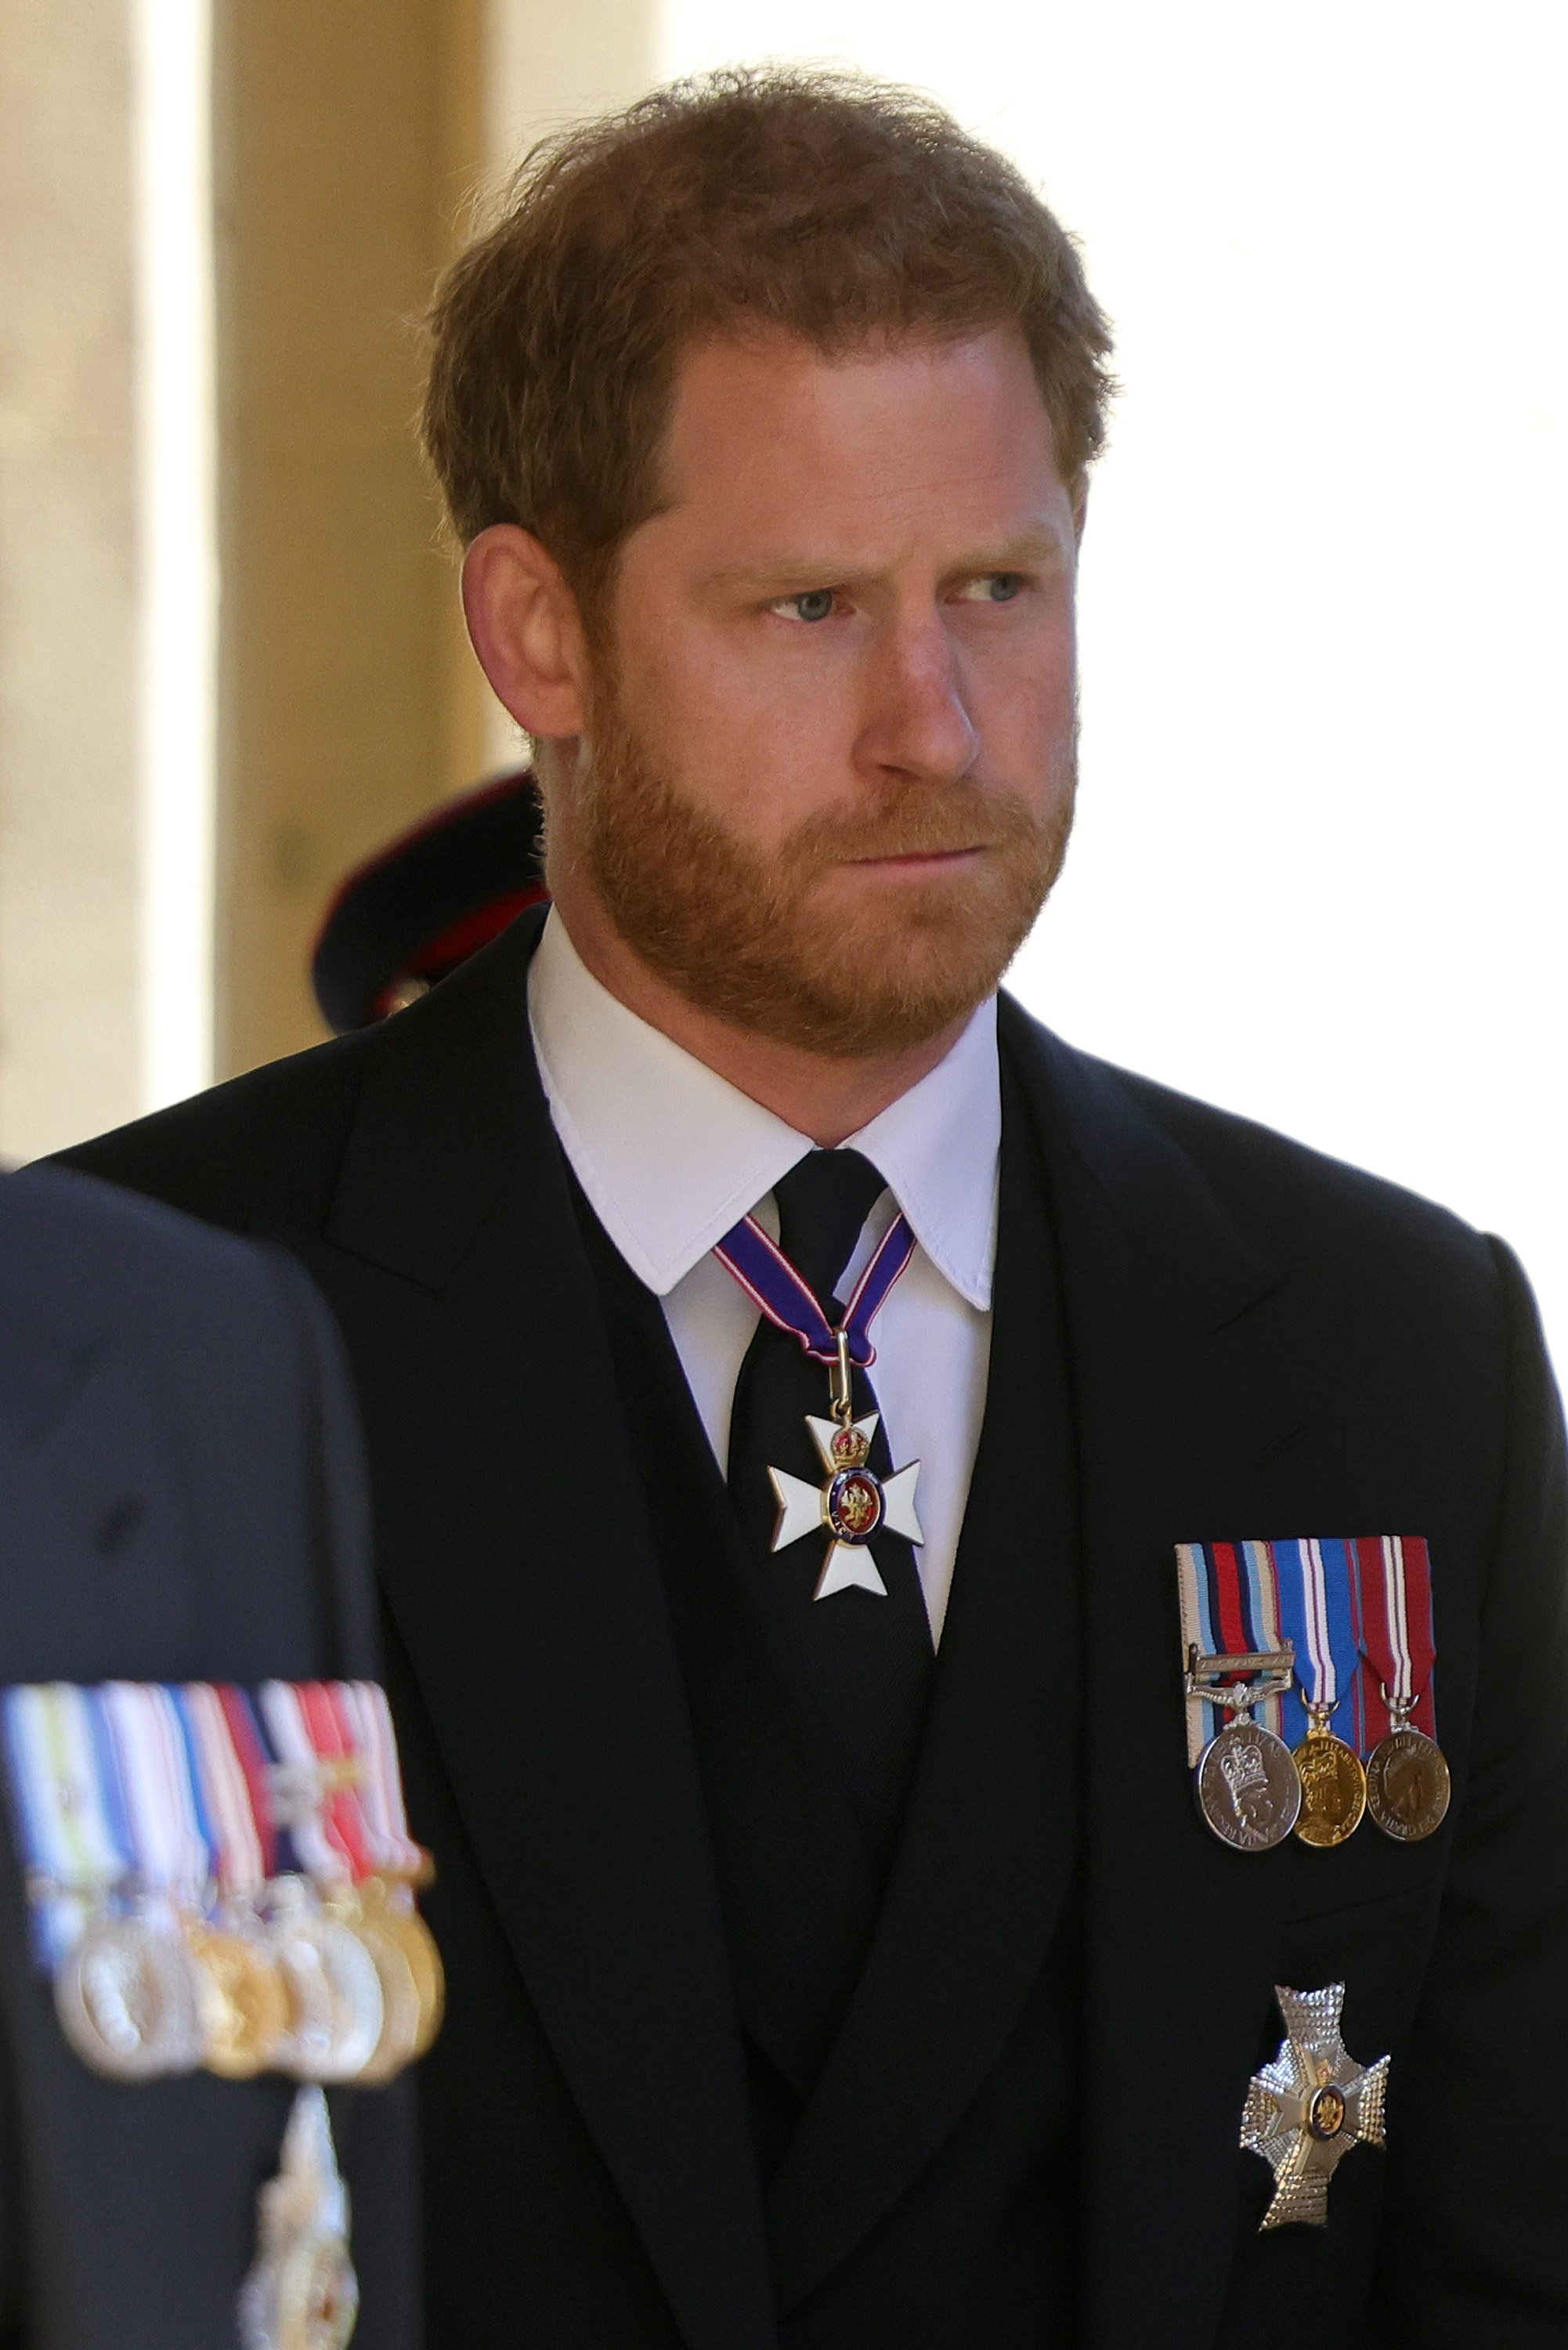 Prince Harry, Duke of Sussex, during the funeral of Prince Philip, Duke of Edinburgh at Windsor Castle on April 17, 2021 in Windsor, England | Source: Getty Images 